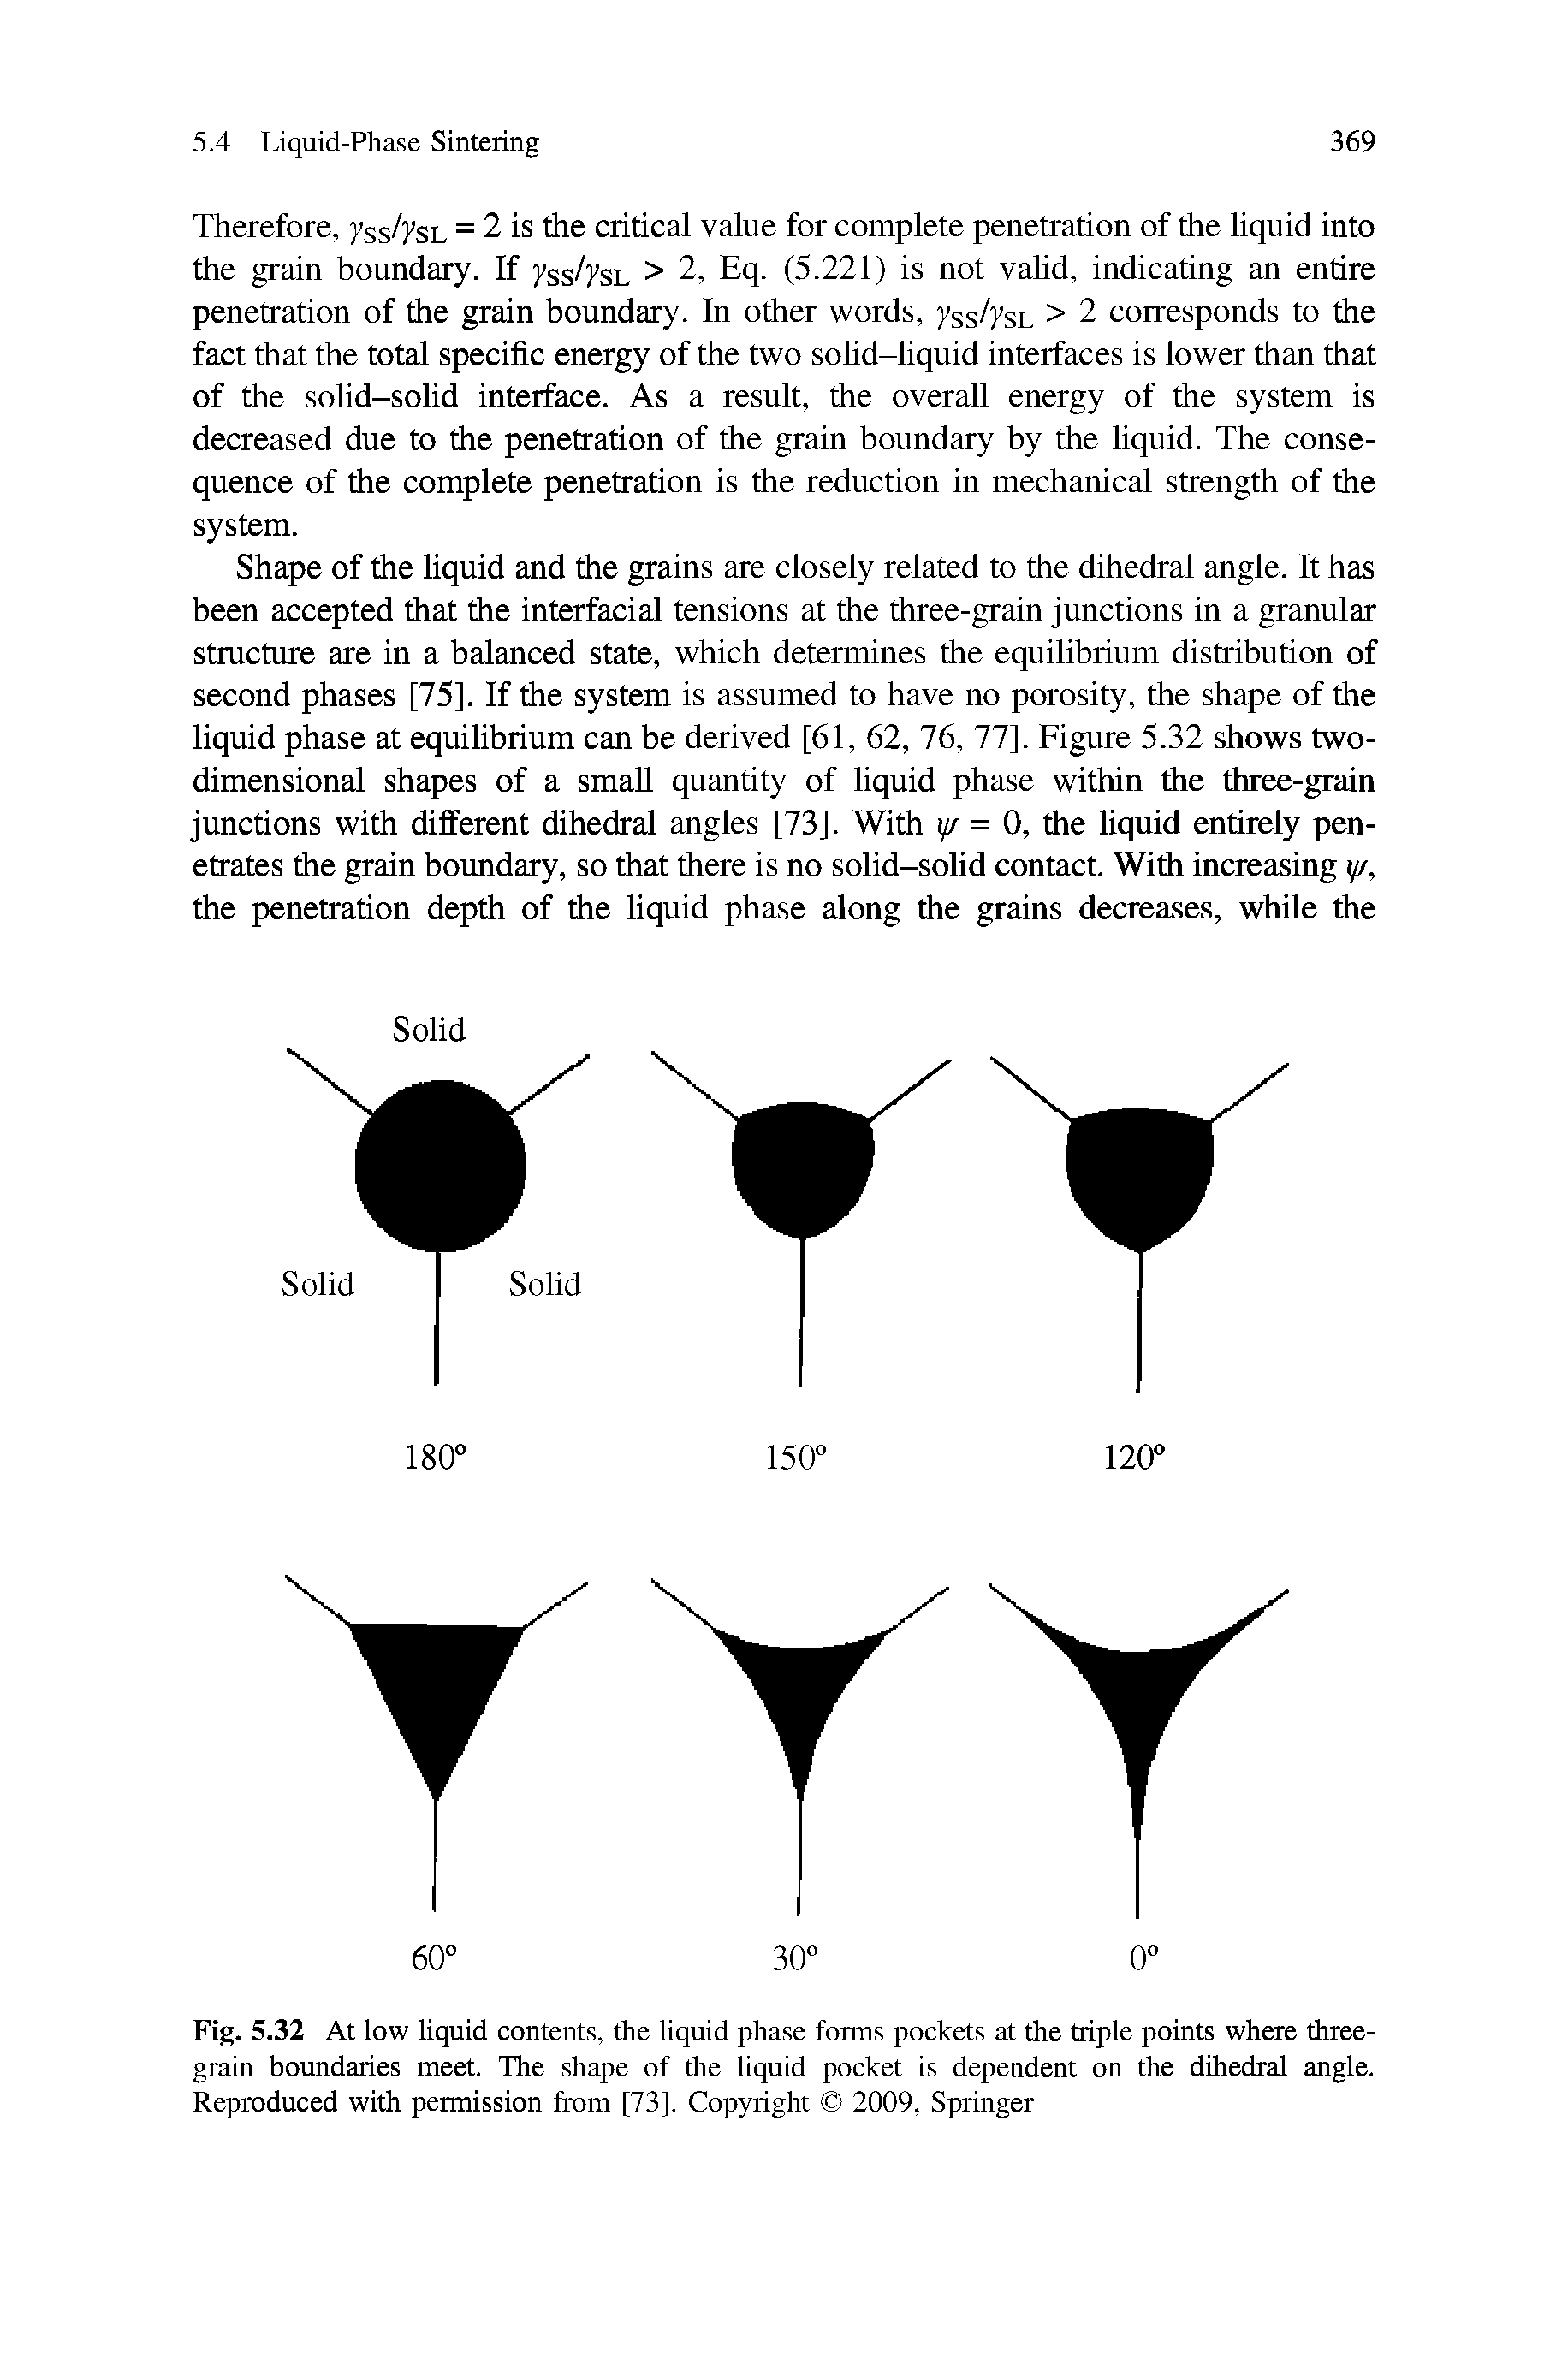 Fig. 5.32 At low liquid contents, the liquid phase forms pockets at the triple points where three-grain boundaries meet. The shape of the liquid pocket is dependent on the dihedral angle. Reproduced with permission from [73]. Copyright 2009, Springer...